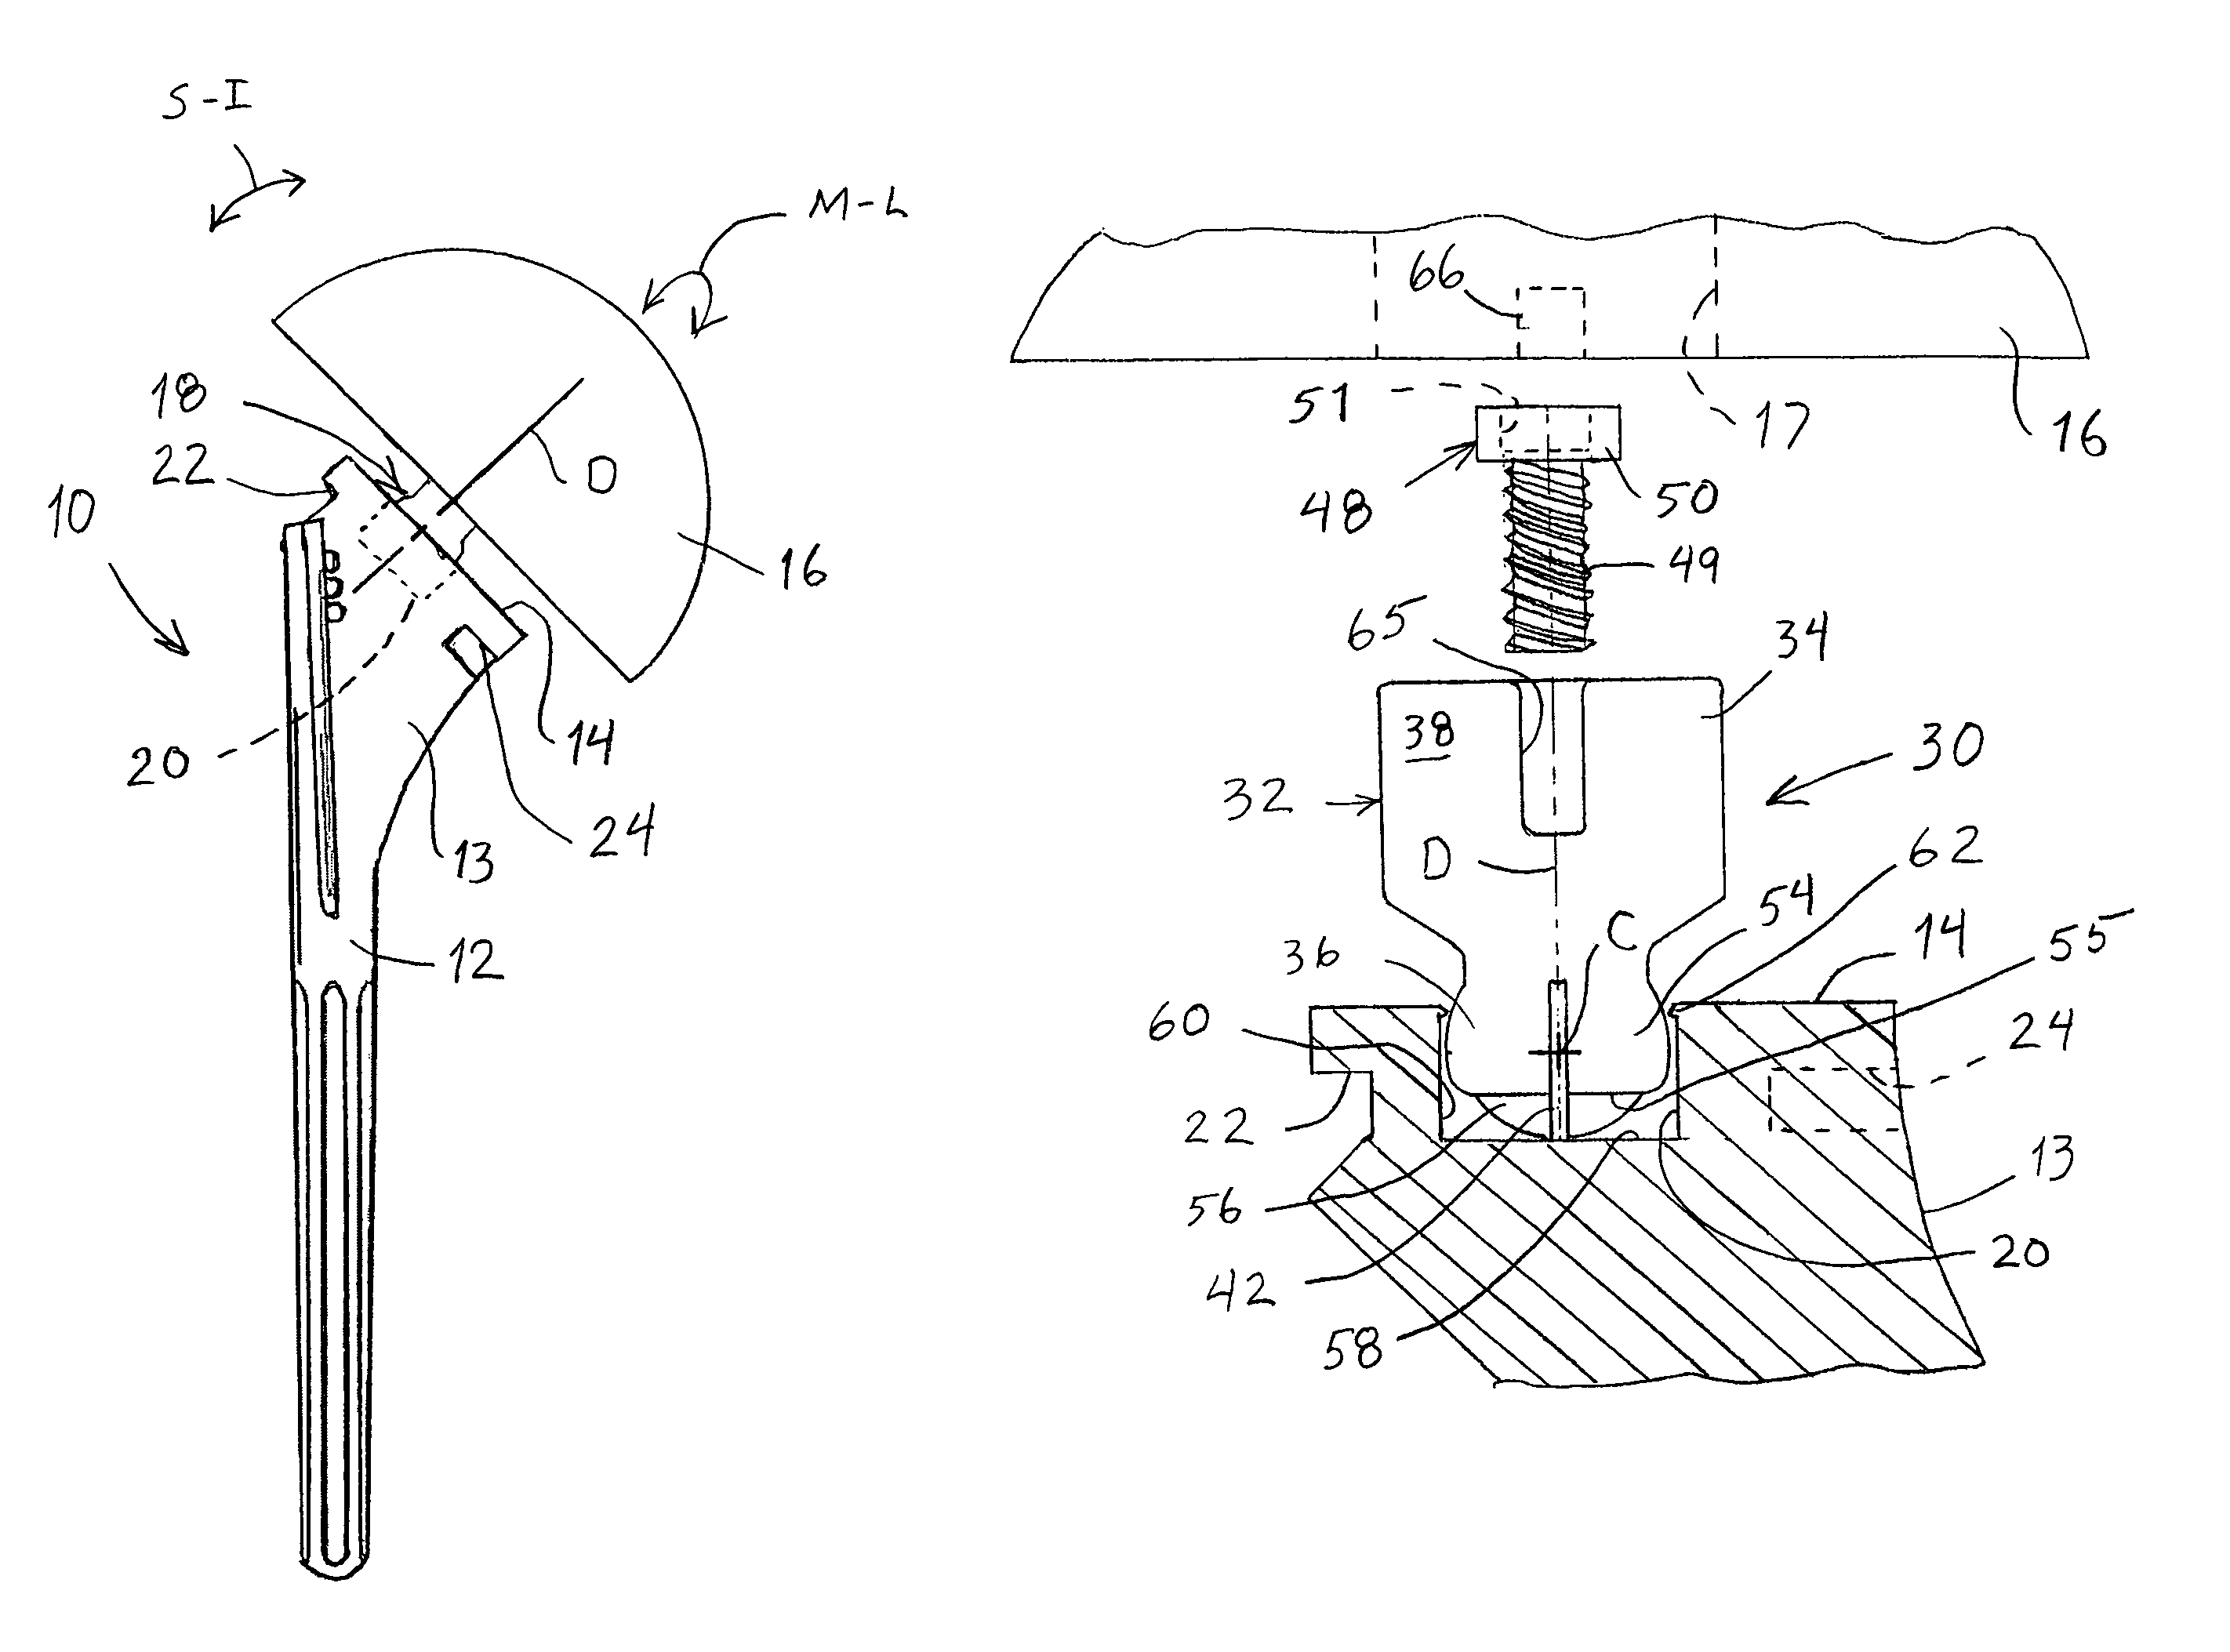 System and method for replicating orthopaedic implant orientation